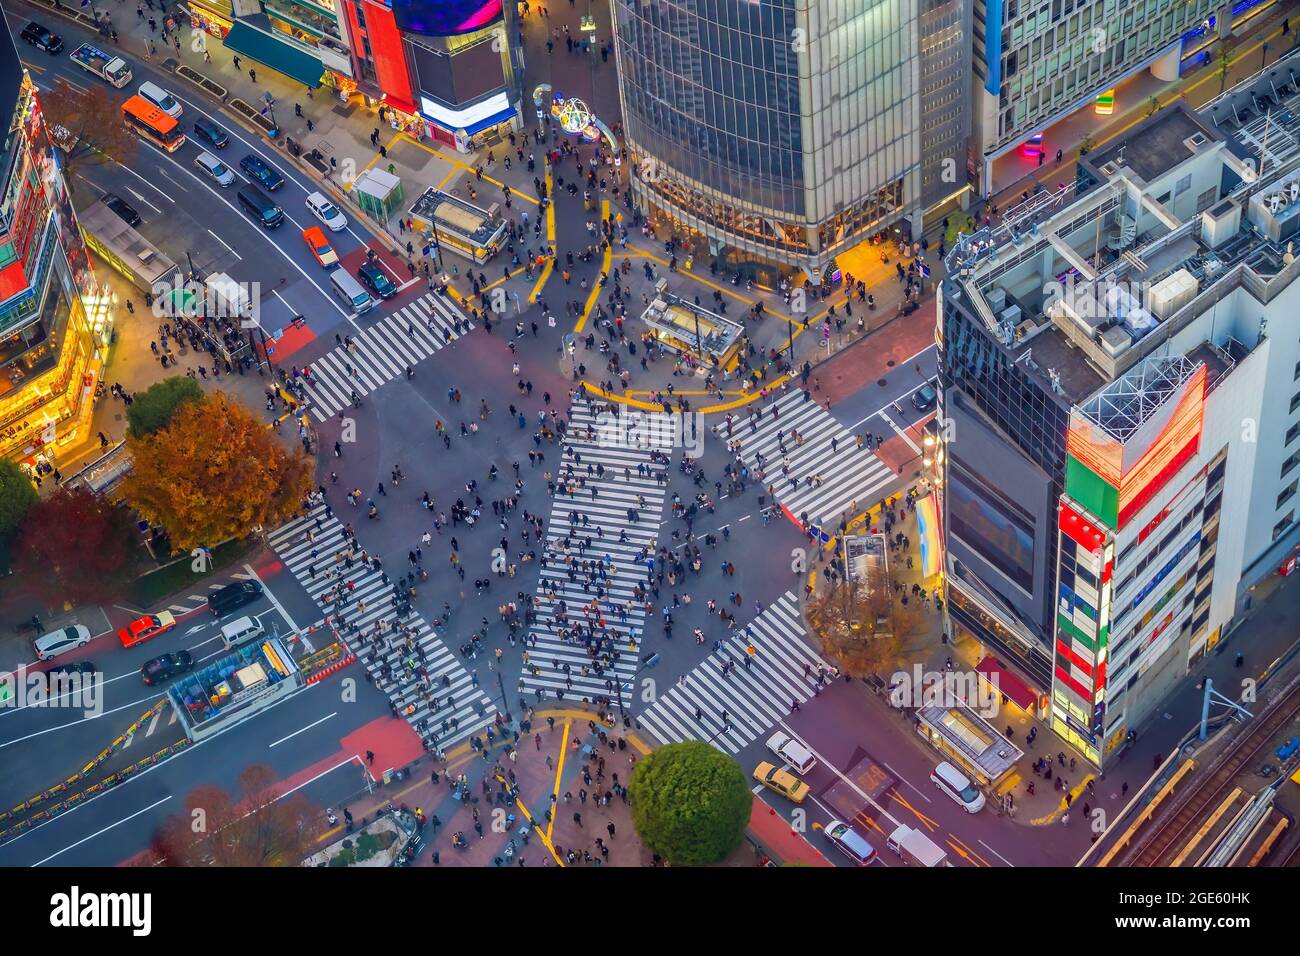 Shibuya Crossing from top view at night in Tokyo, Japan Stock Photo